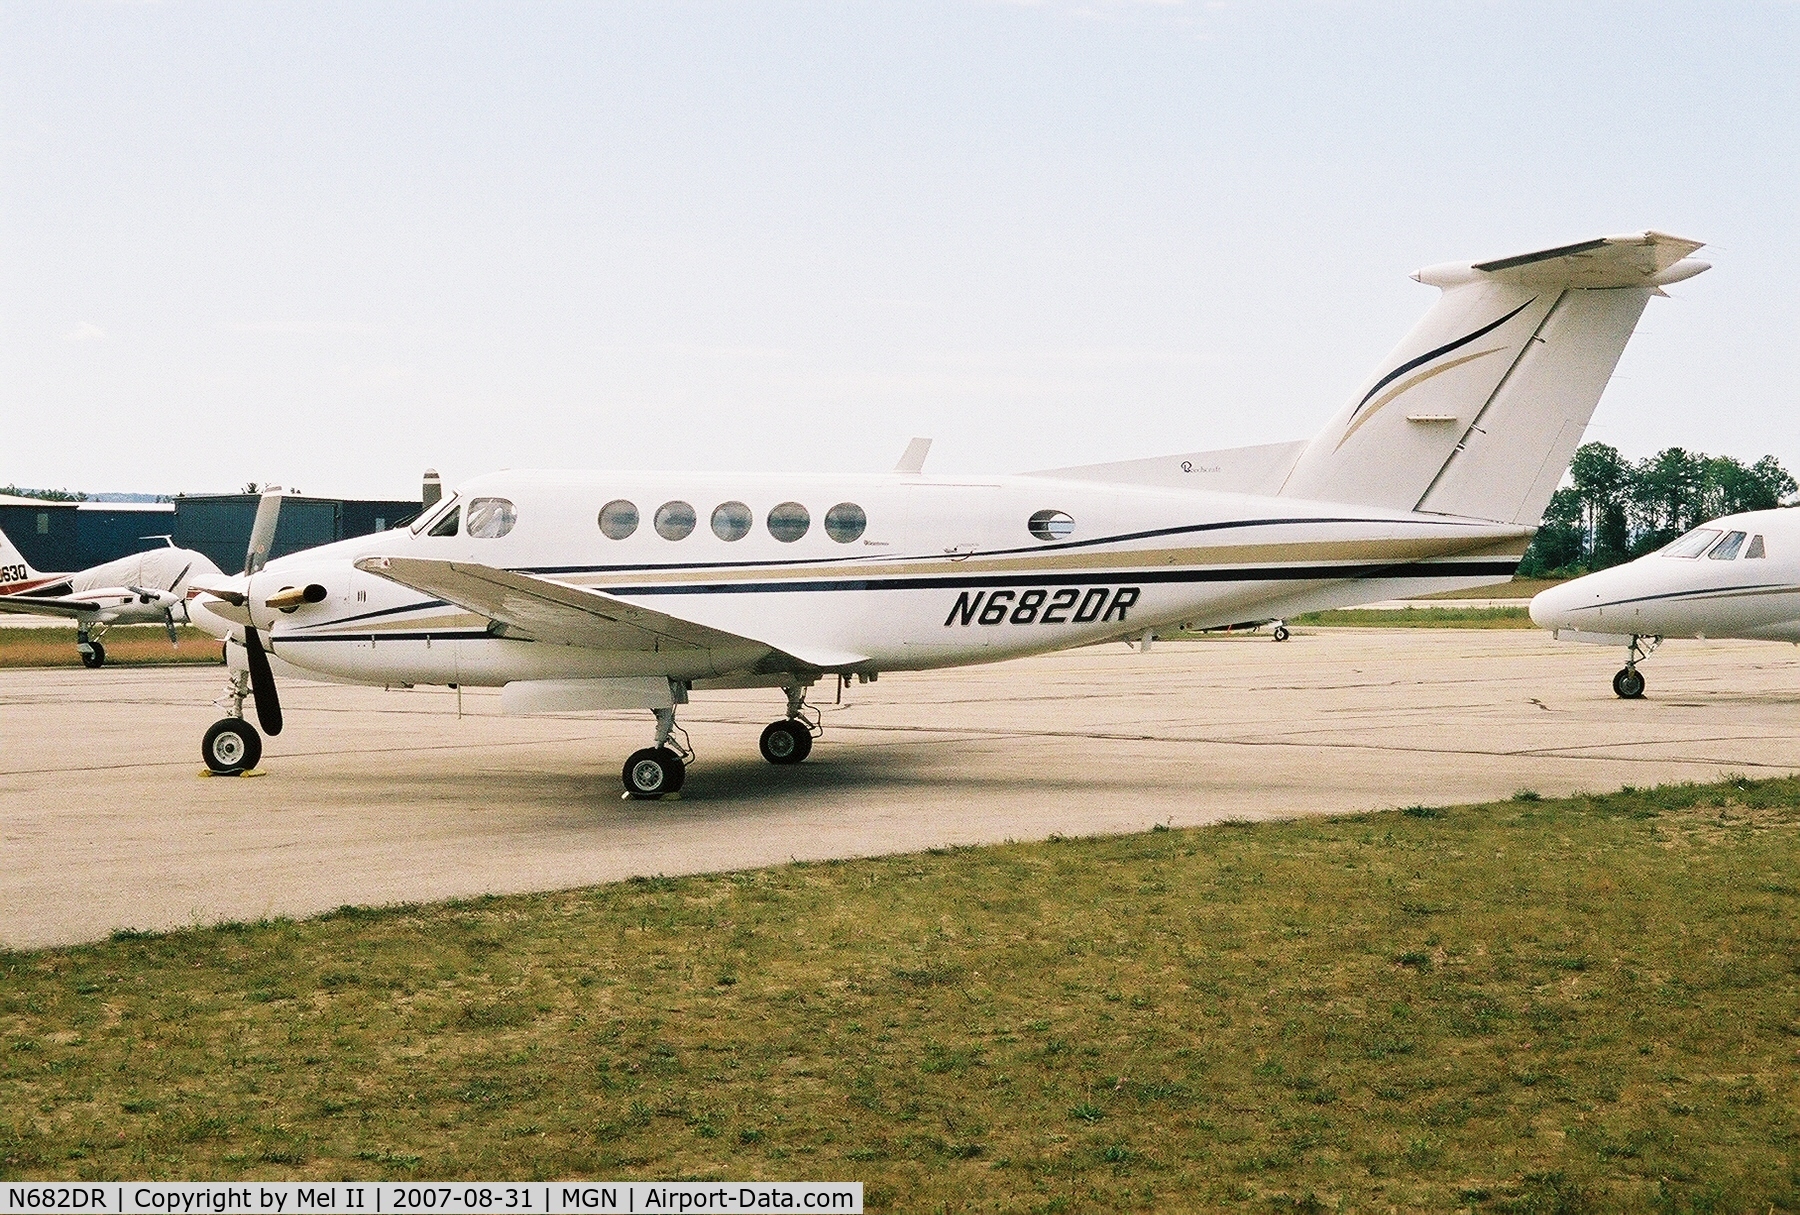 N682DR, 1976 Beech 200 Super King Air C/N BB-130, Parked @ Harbor Springs Airport (MGN)